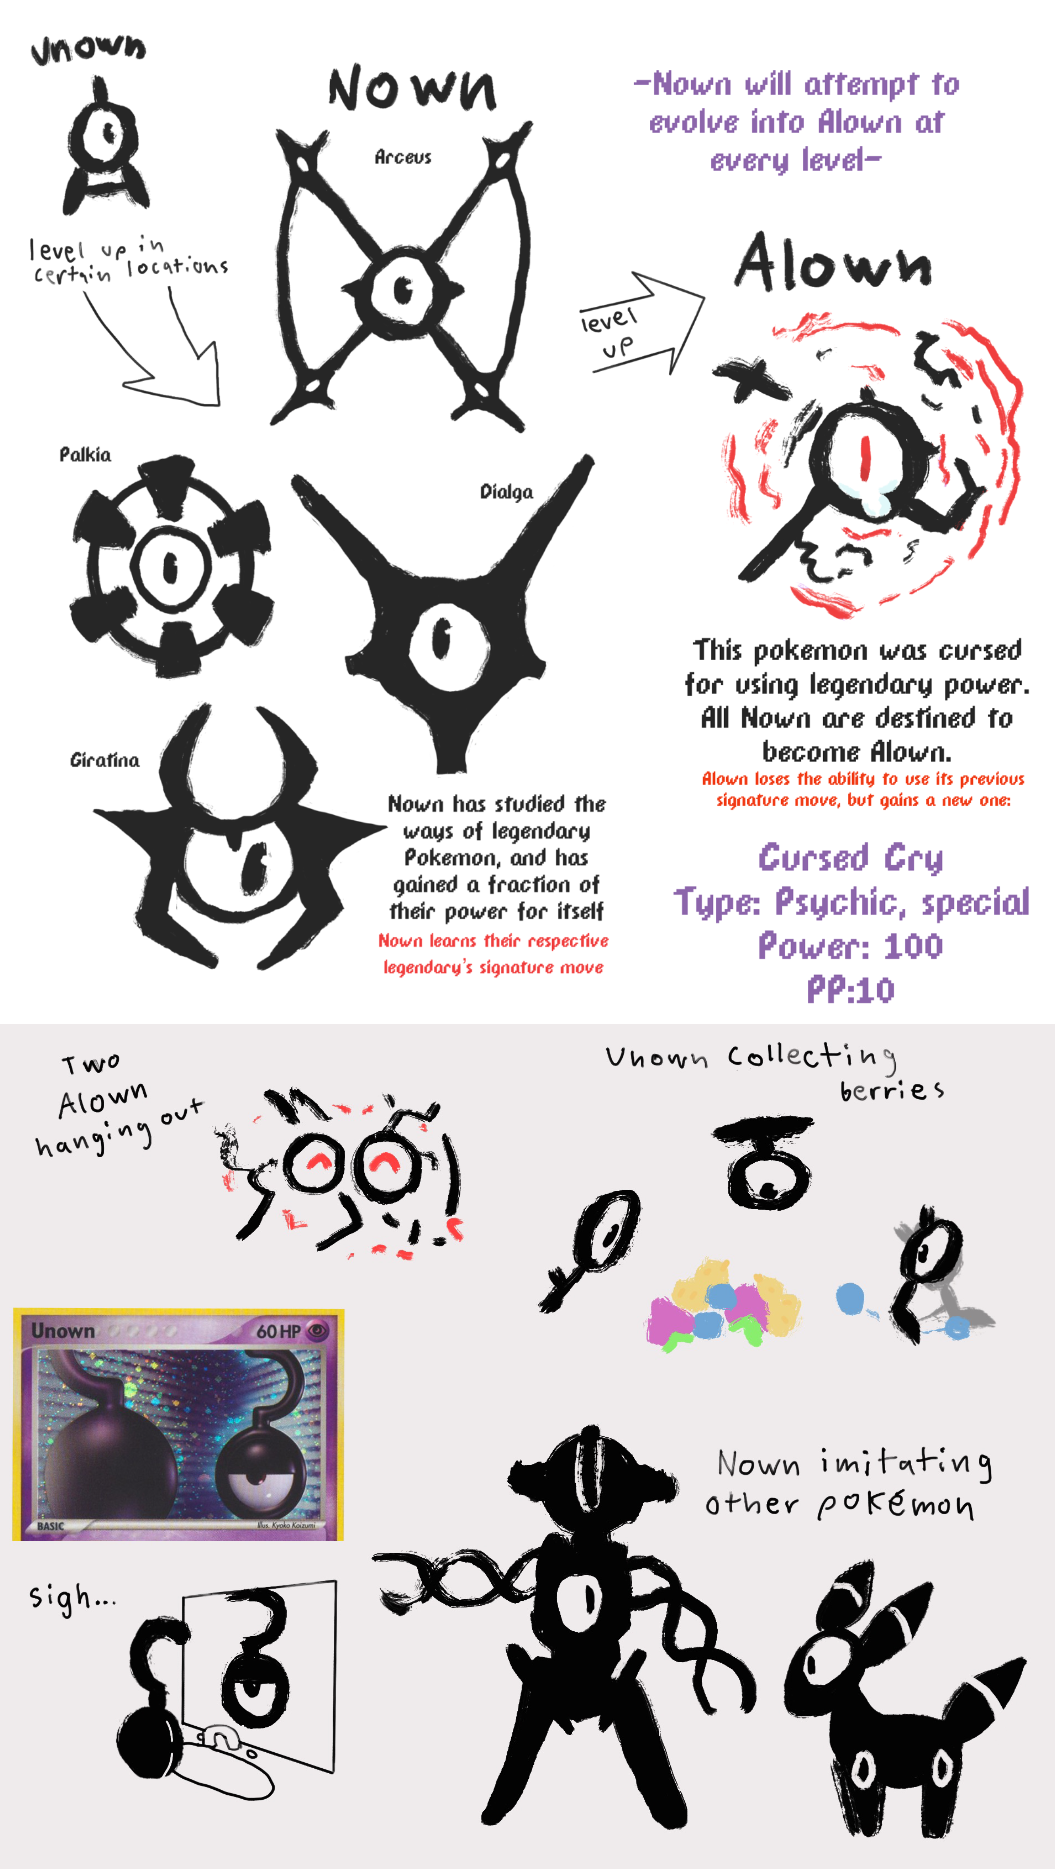 Unown evos 1 by Aw-colorcat on DeviantArt